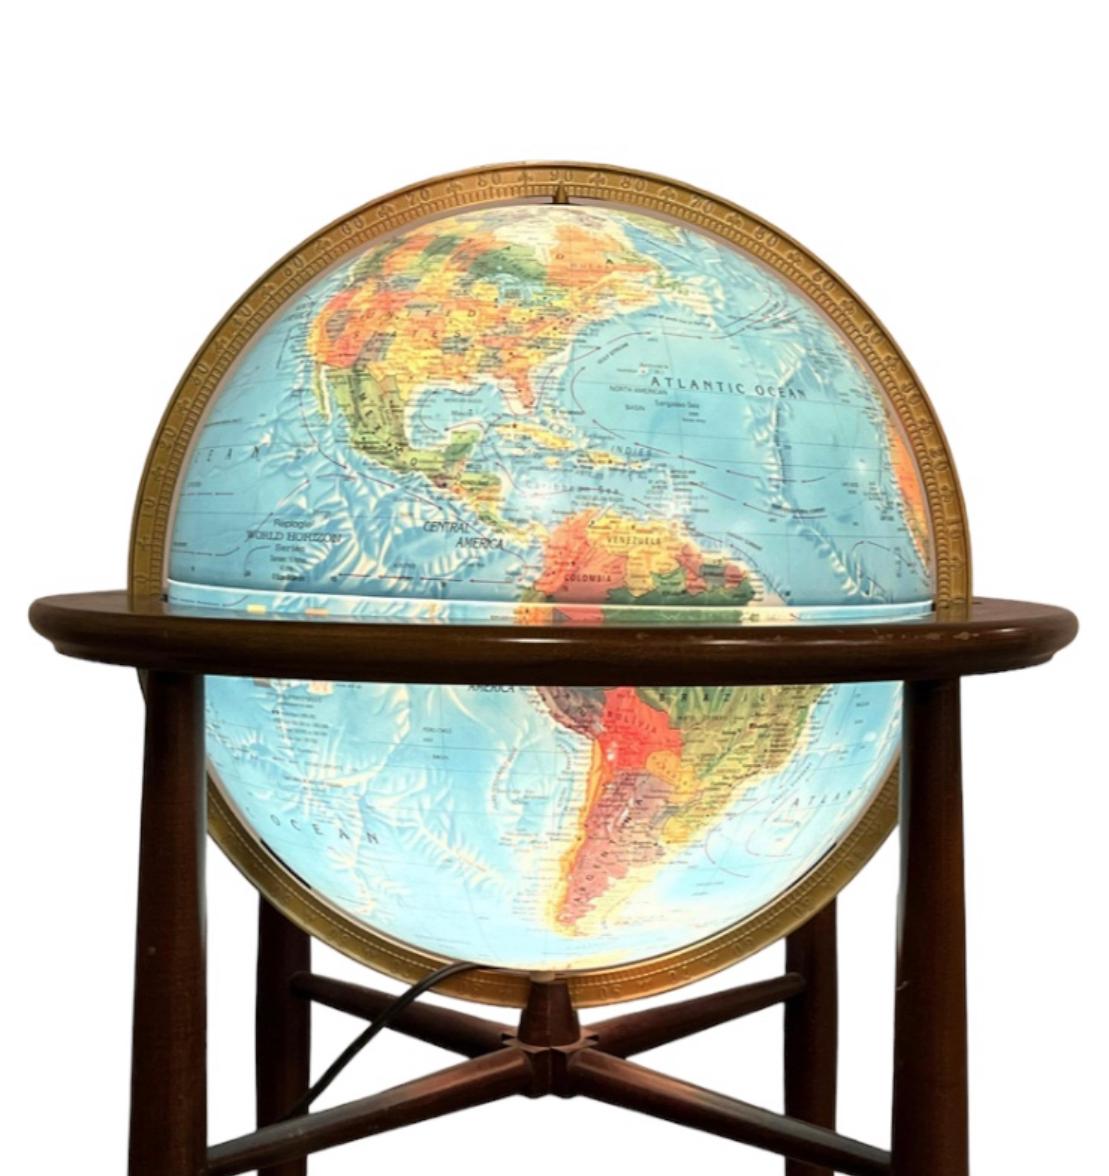 Light up world globe by Replogle. Signed and guaranteed authentic. Attractive with or without globe being illuminated. Simple elegant modernist lines on solid wood frame. In good condition with age appropriate appearance. Great color to the globe